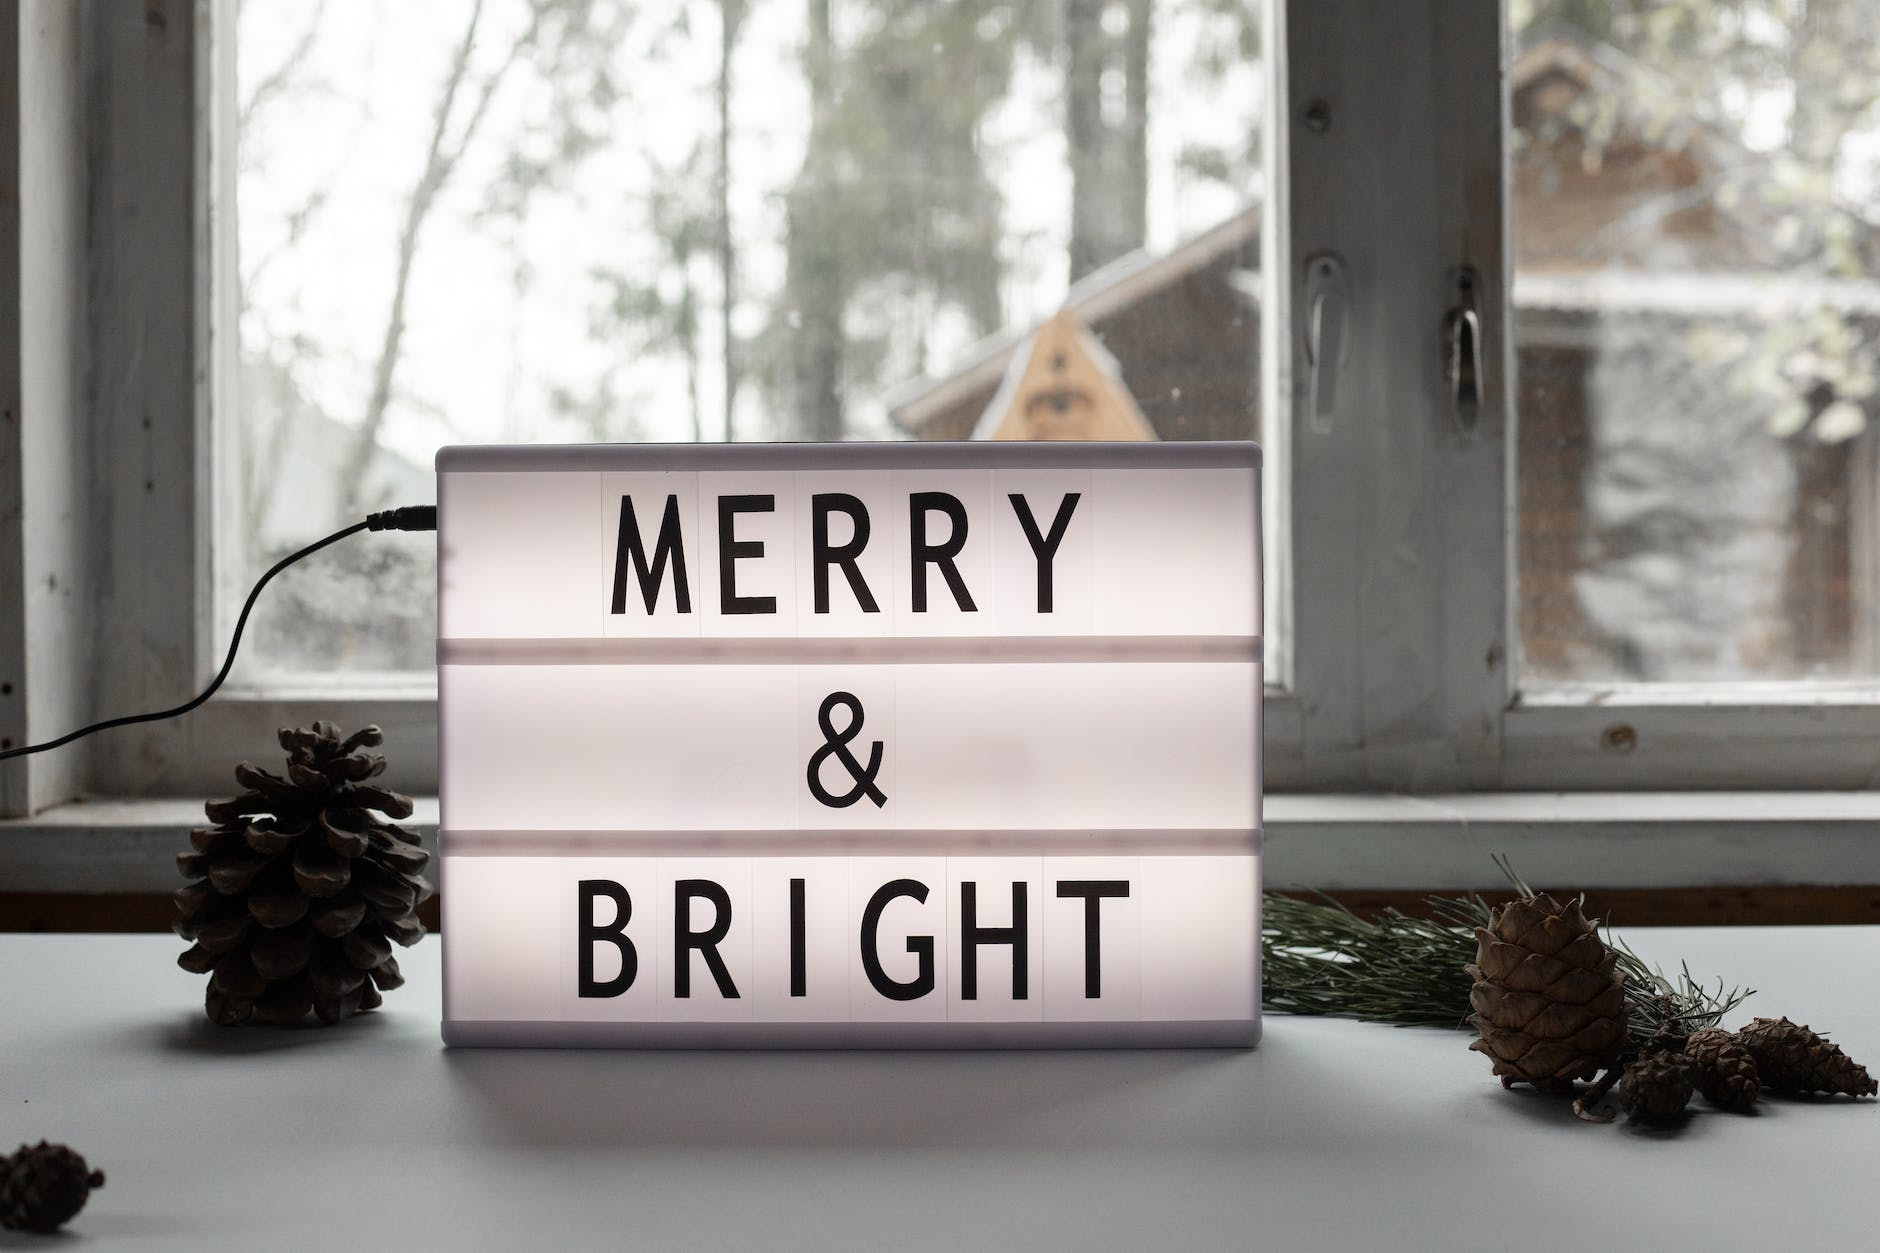 merry and bright title on electric signboard on windowsill